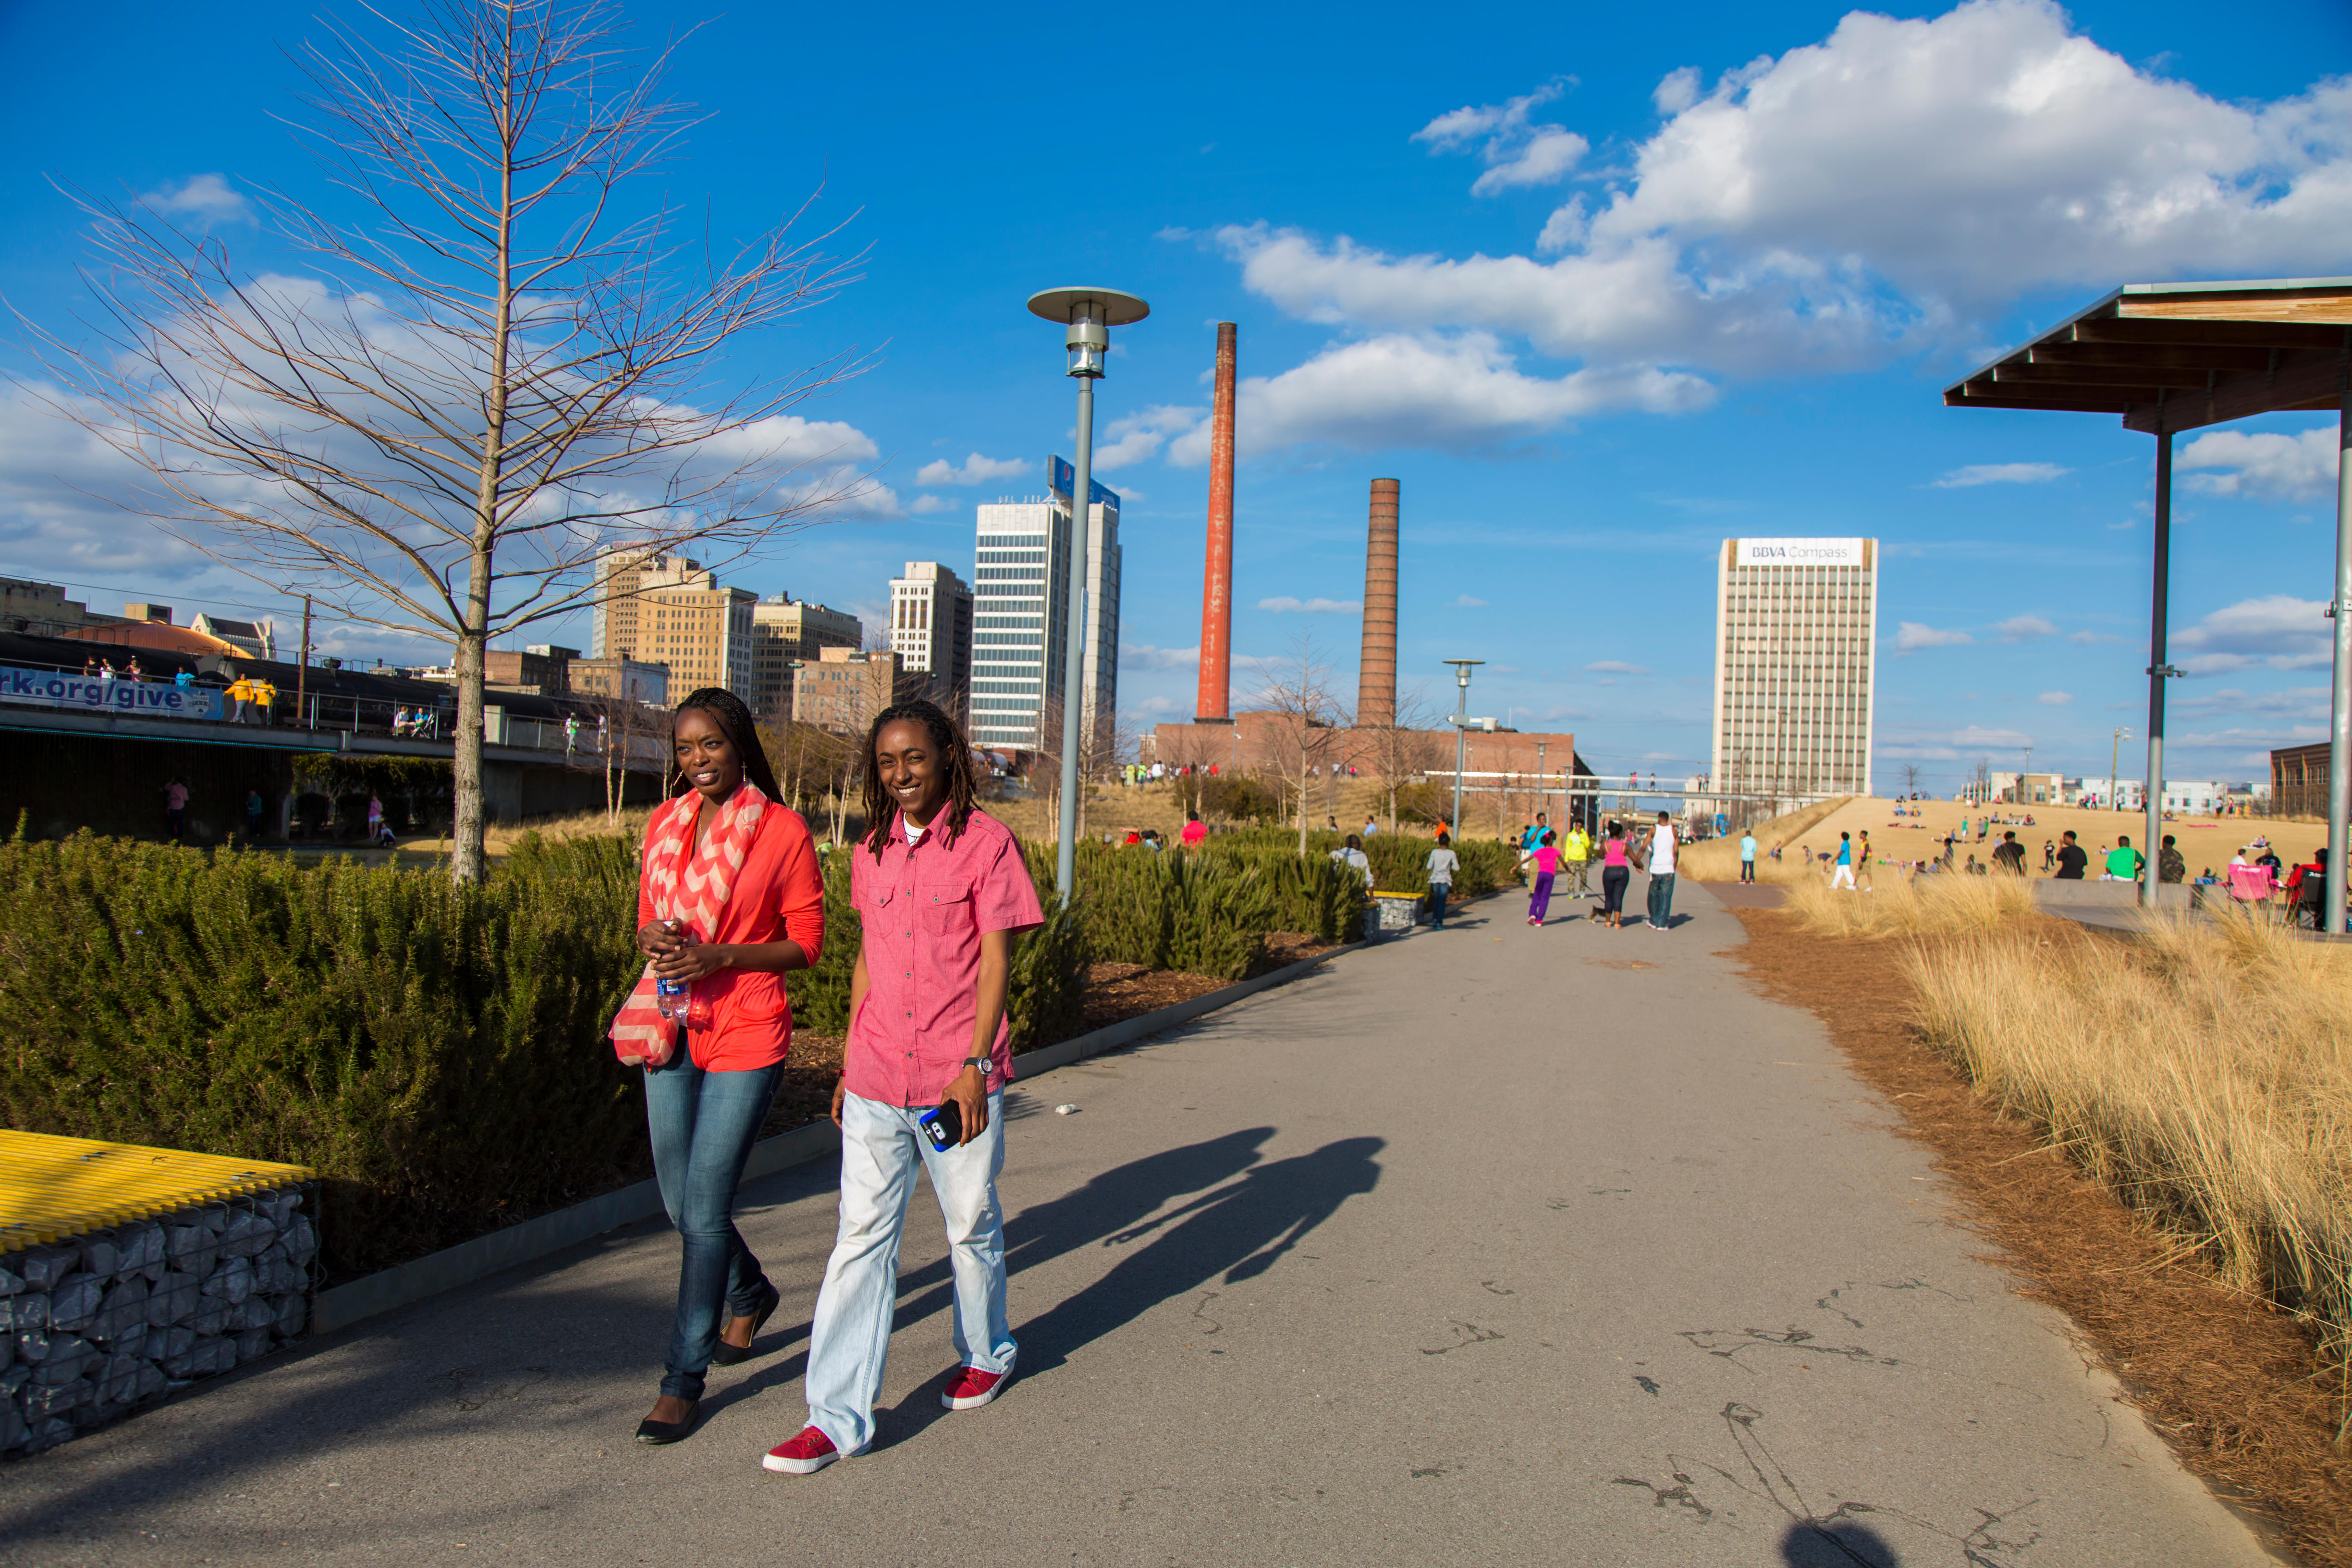 Railroad Park, an 8 block long green space that celebrates the city's industrial and artistic heritage.